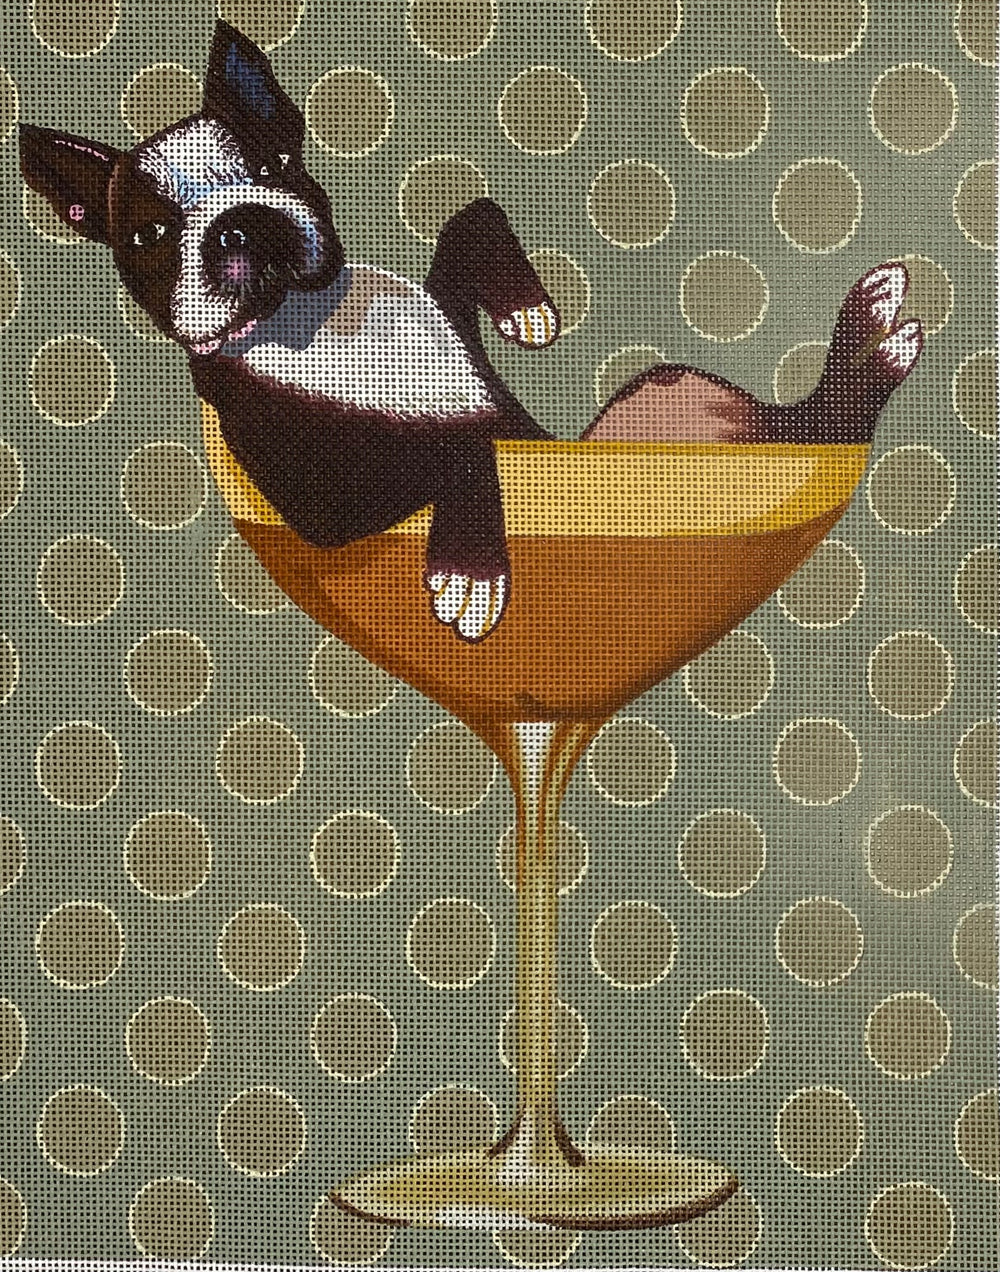 Boston Terrier Cocktail with stitch guide